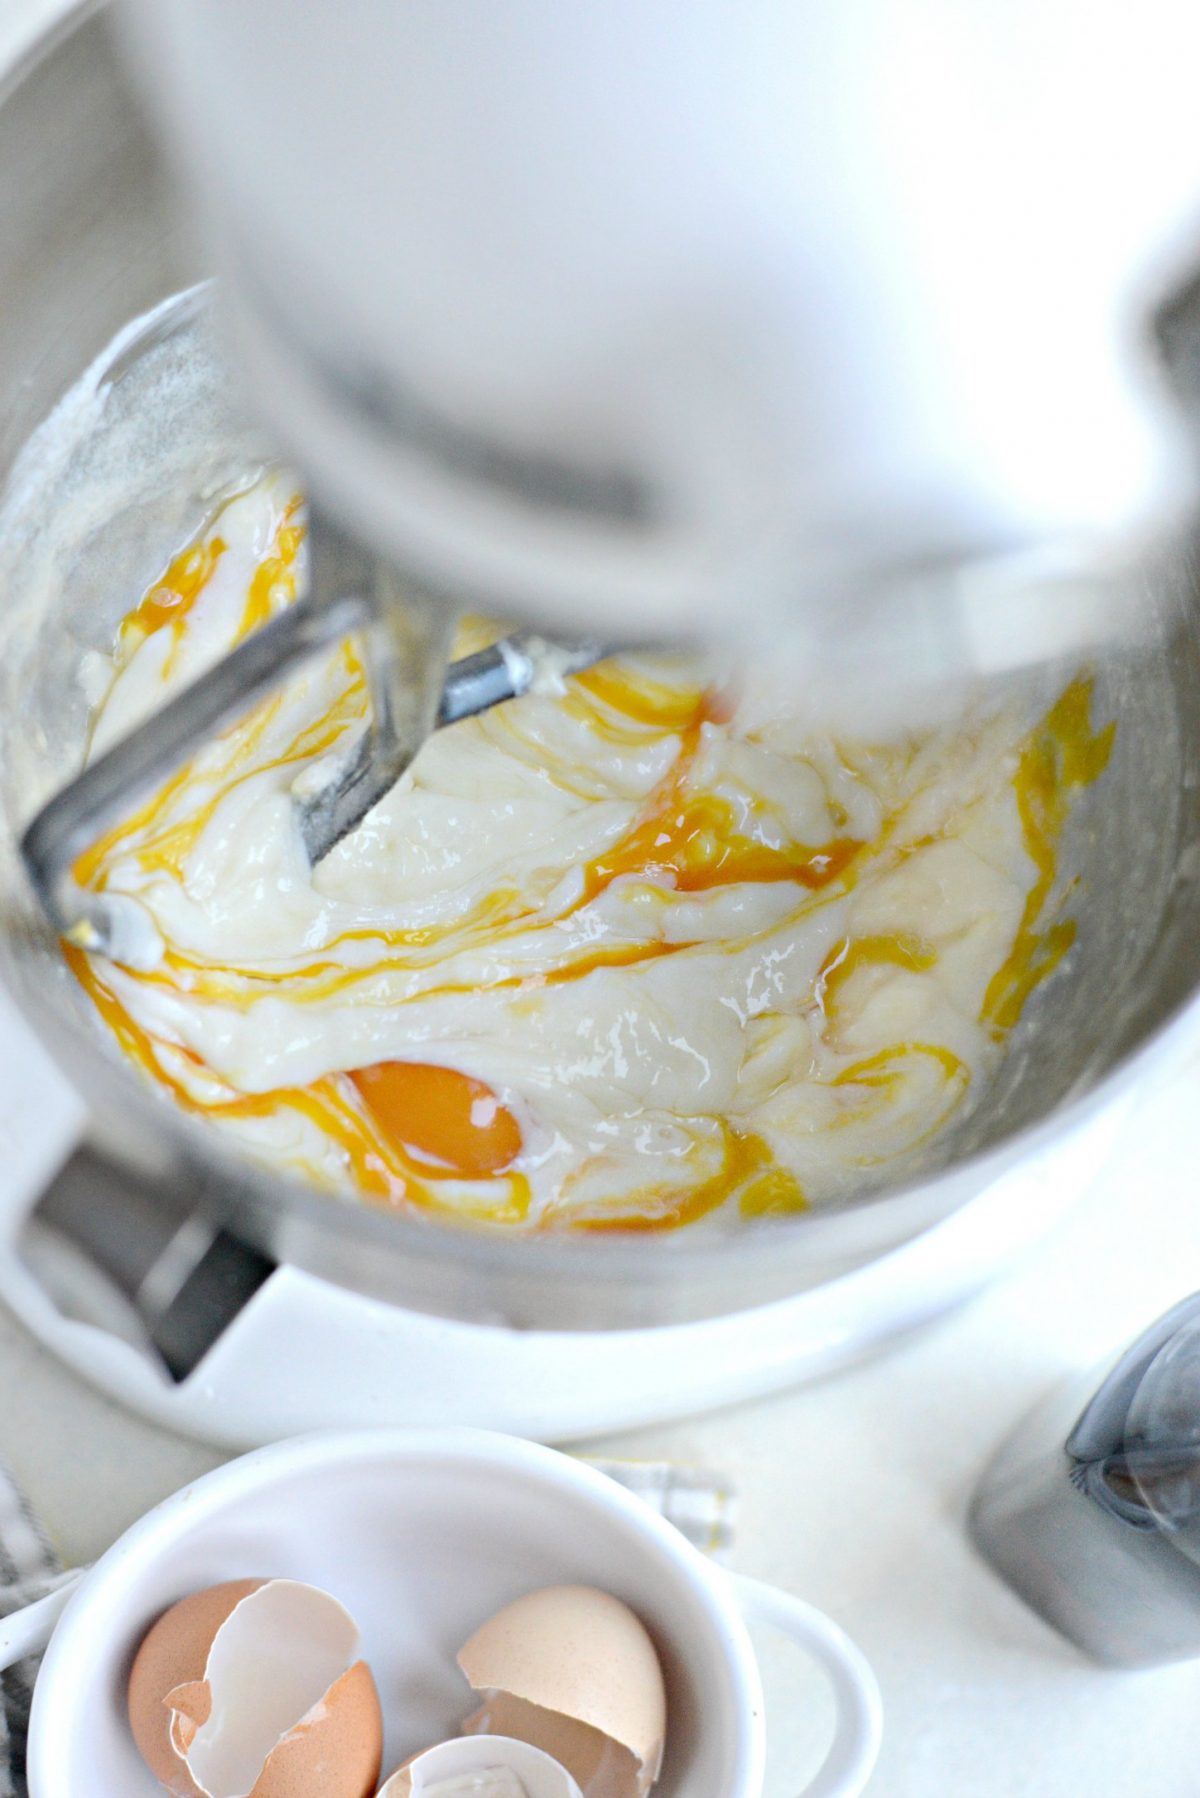 Mix well after each egg before adding vanilla.